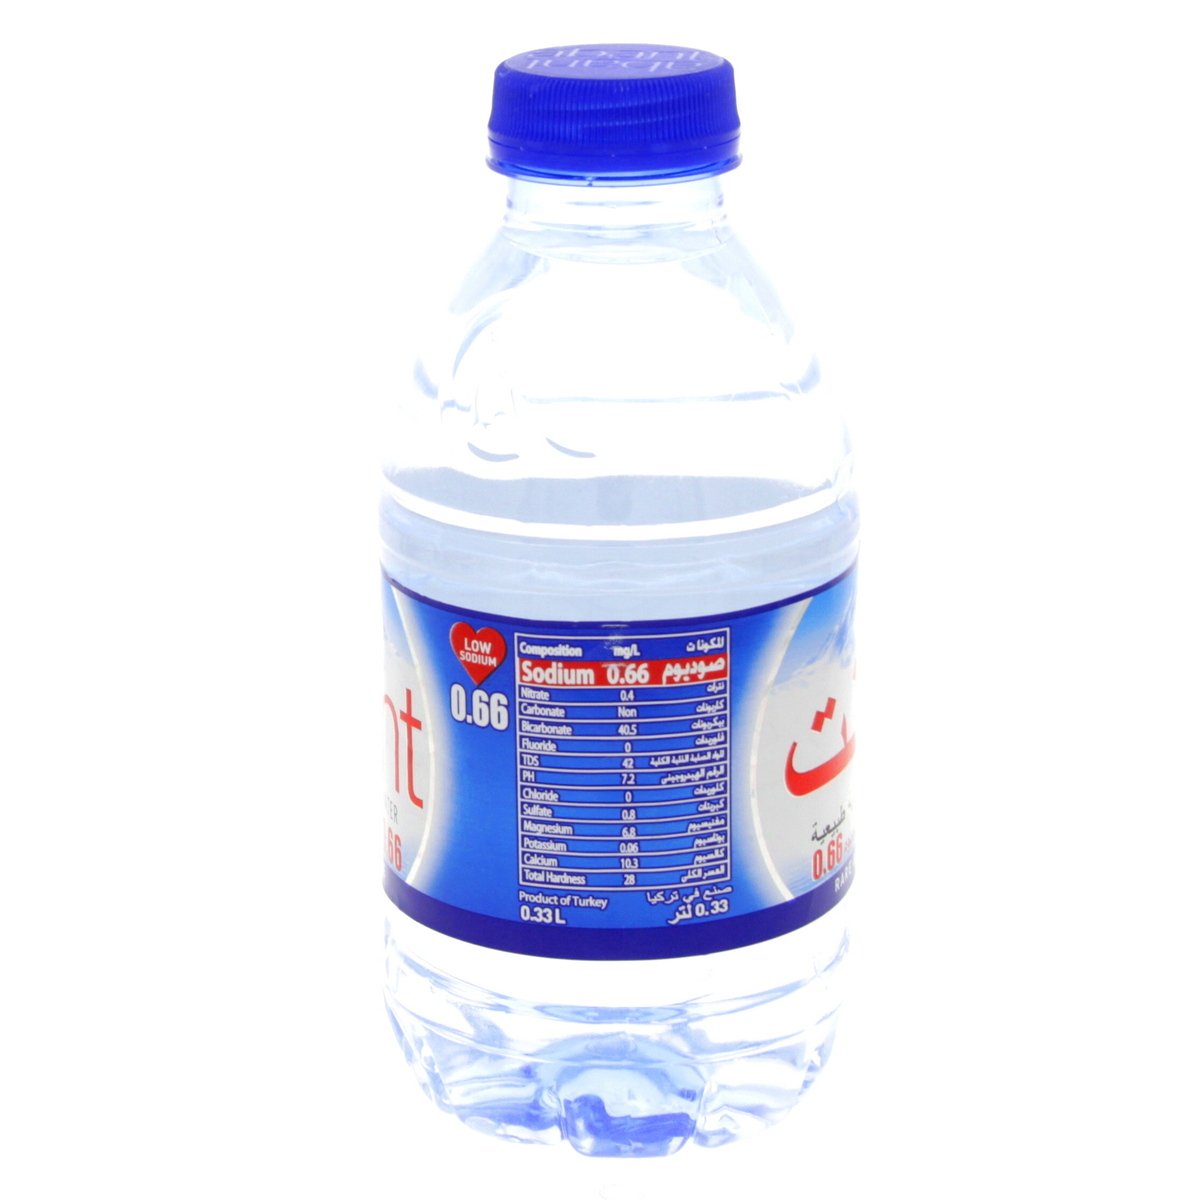 Abant Natural Spring Water 12 x 330 ml